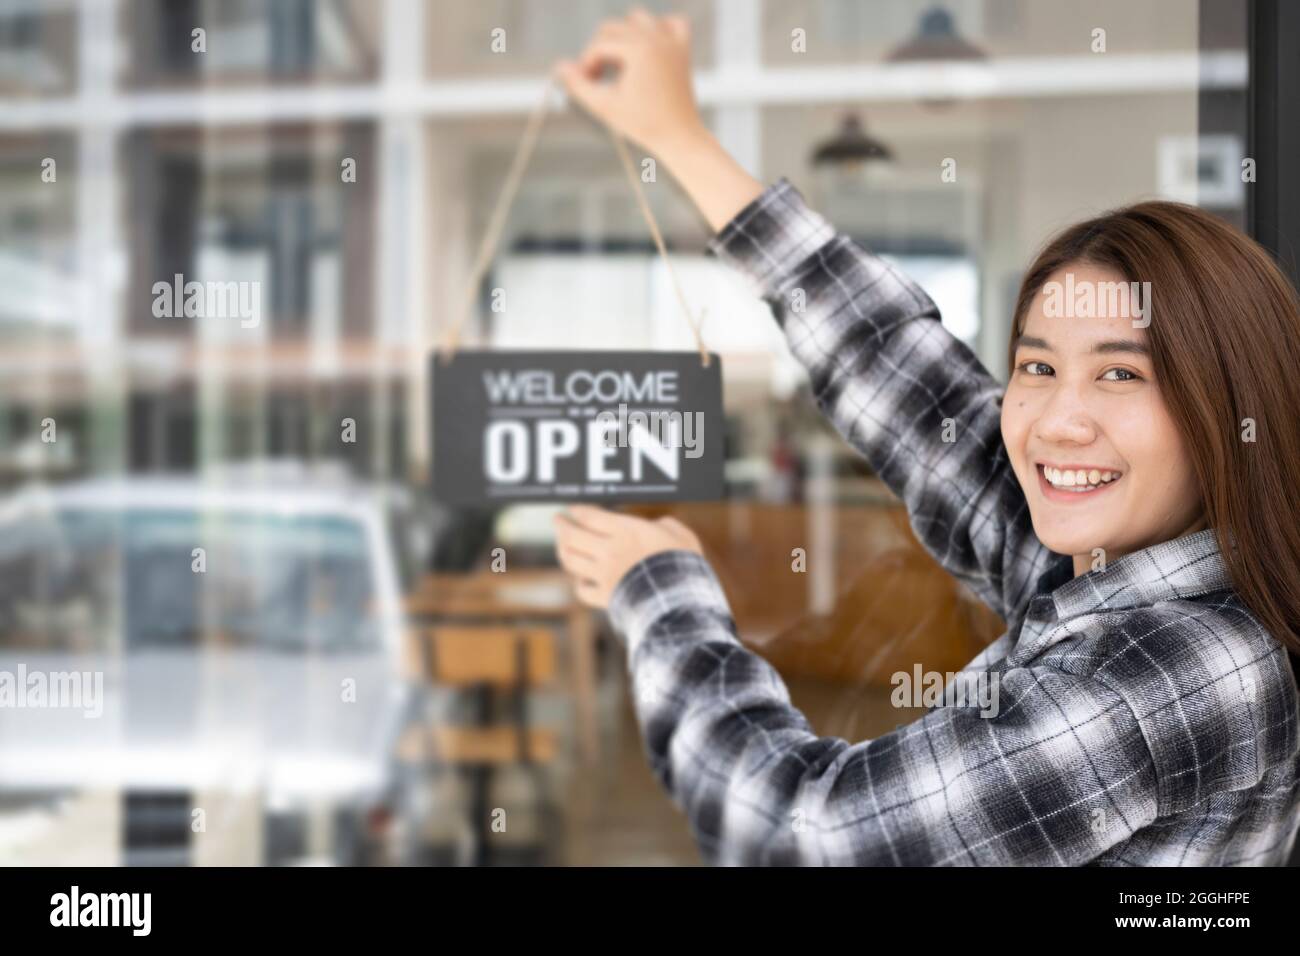 Small business owner turning open sign board on glass window. Stock Photo